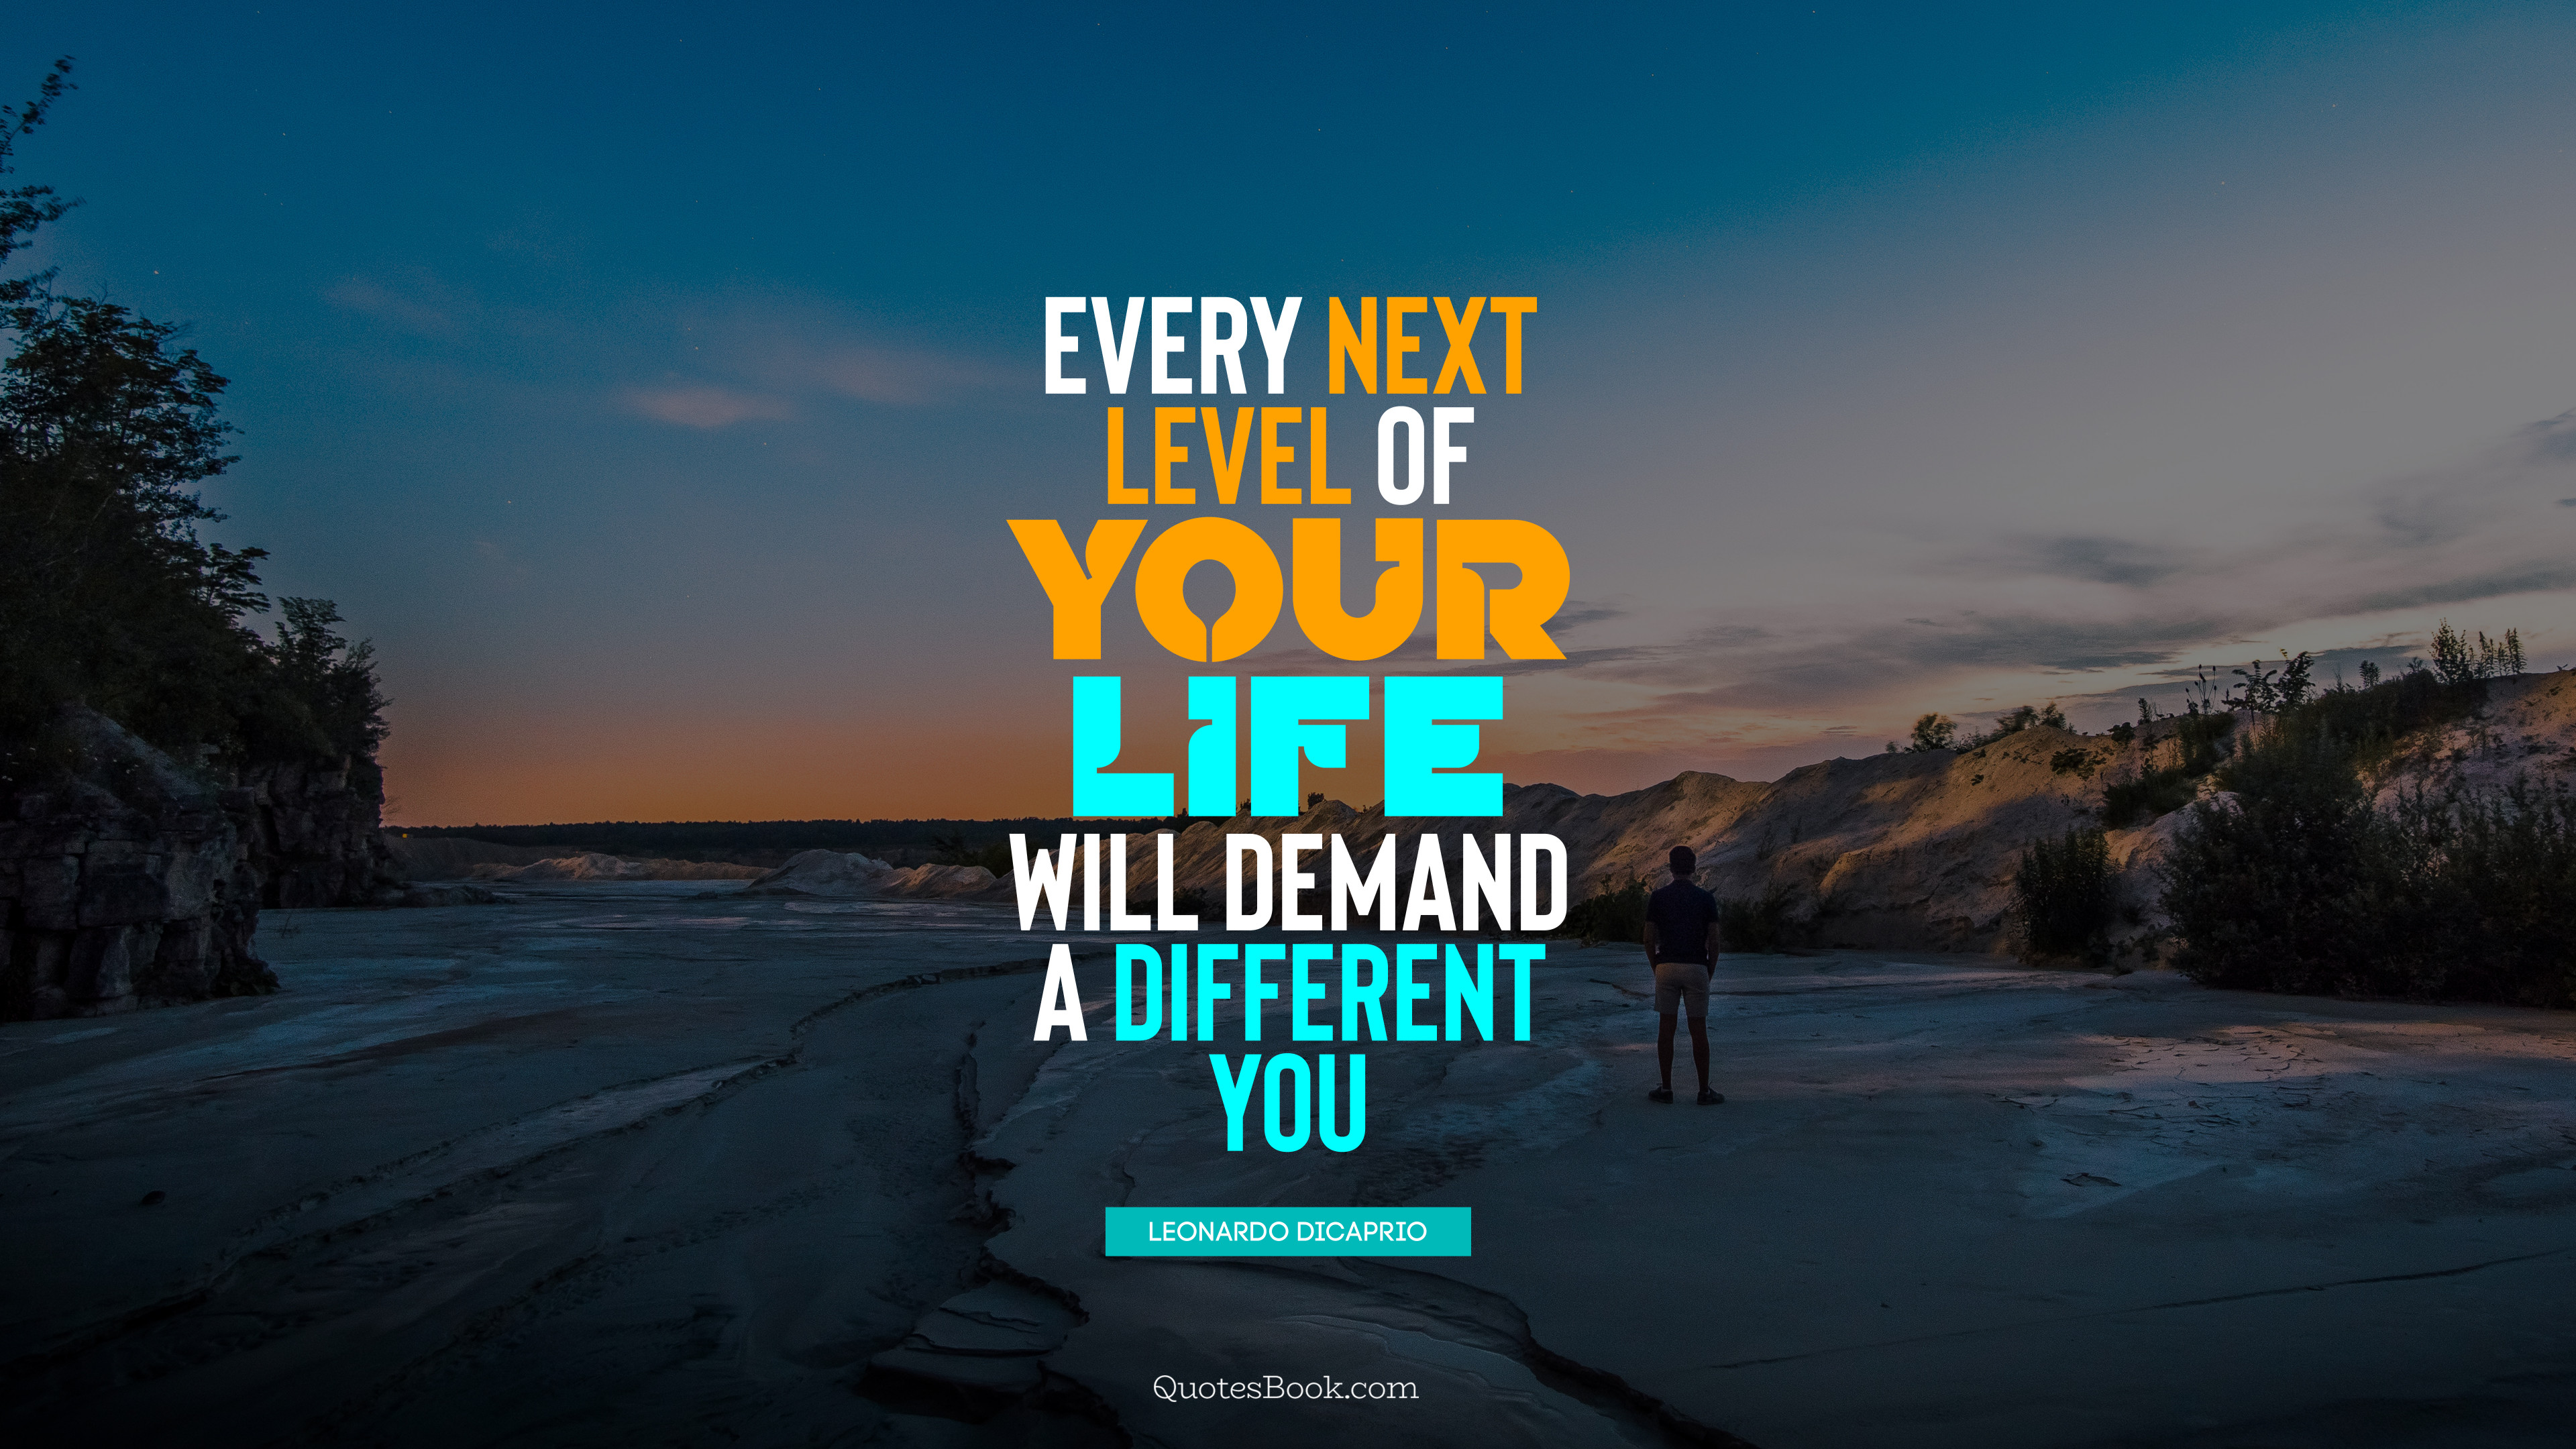 Every next level of your life will demand a different you. - Quote by